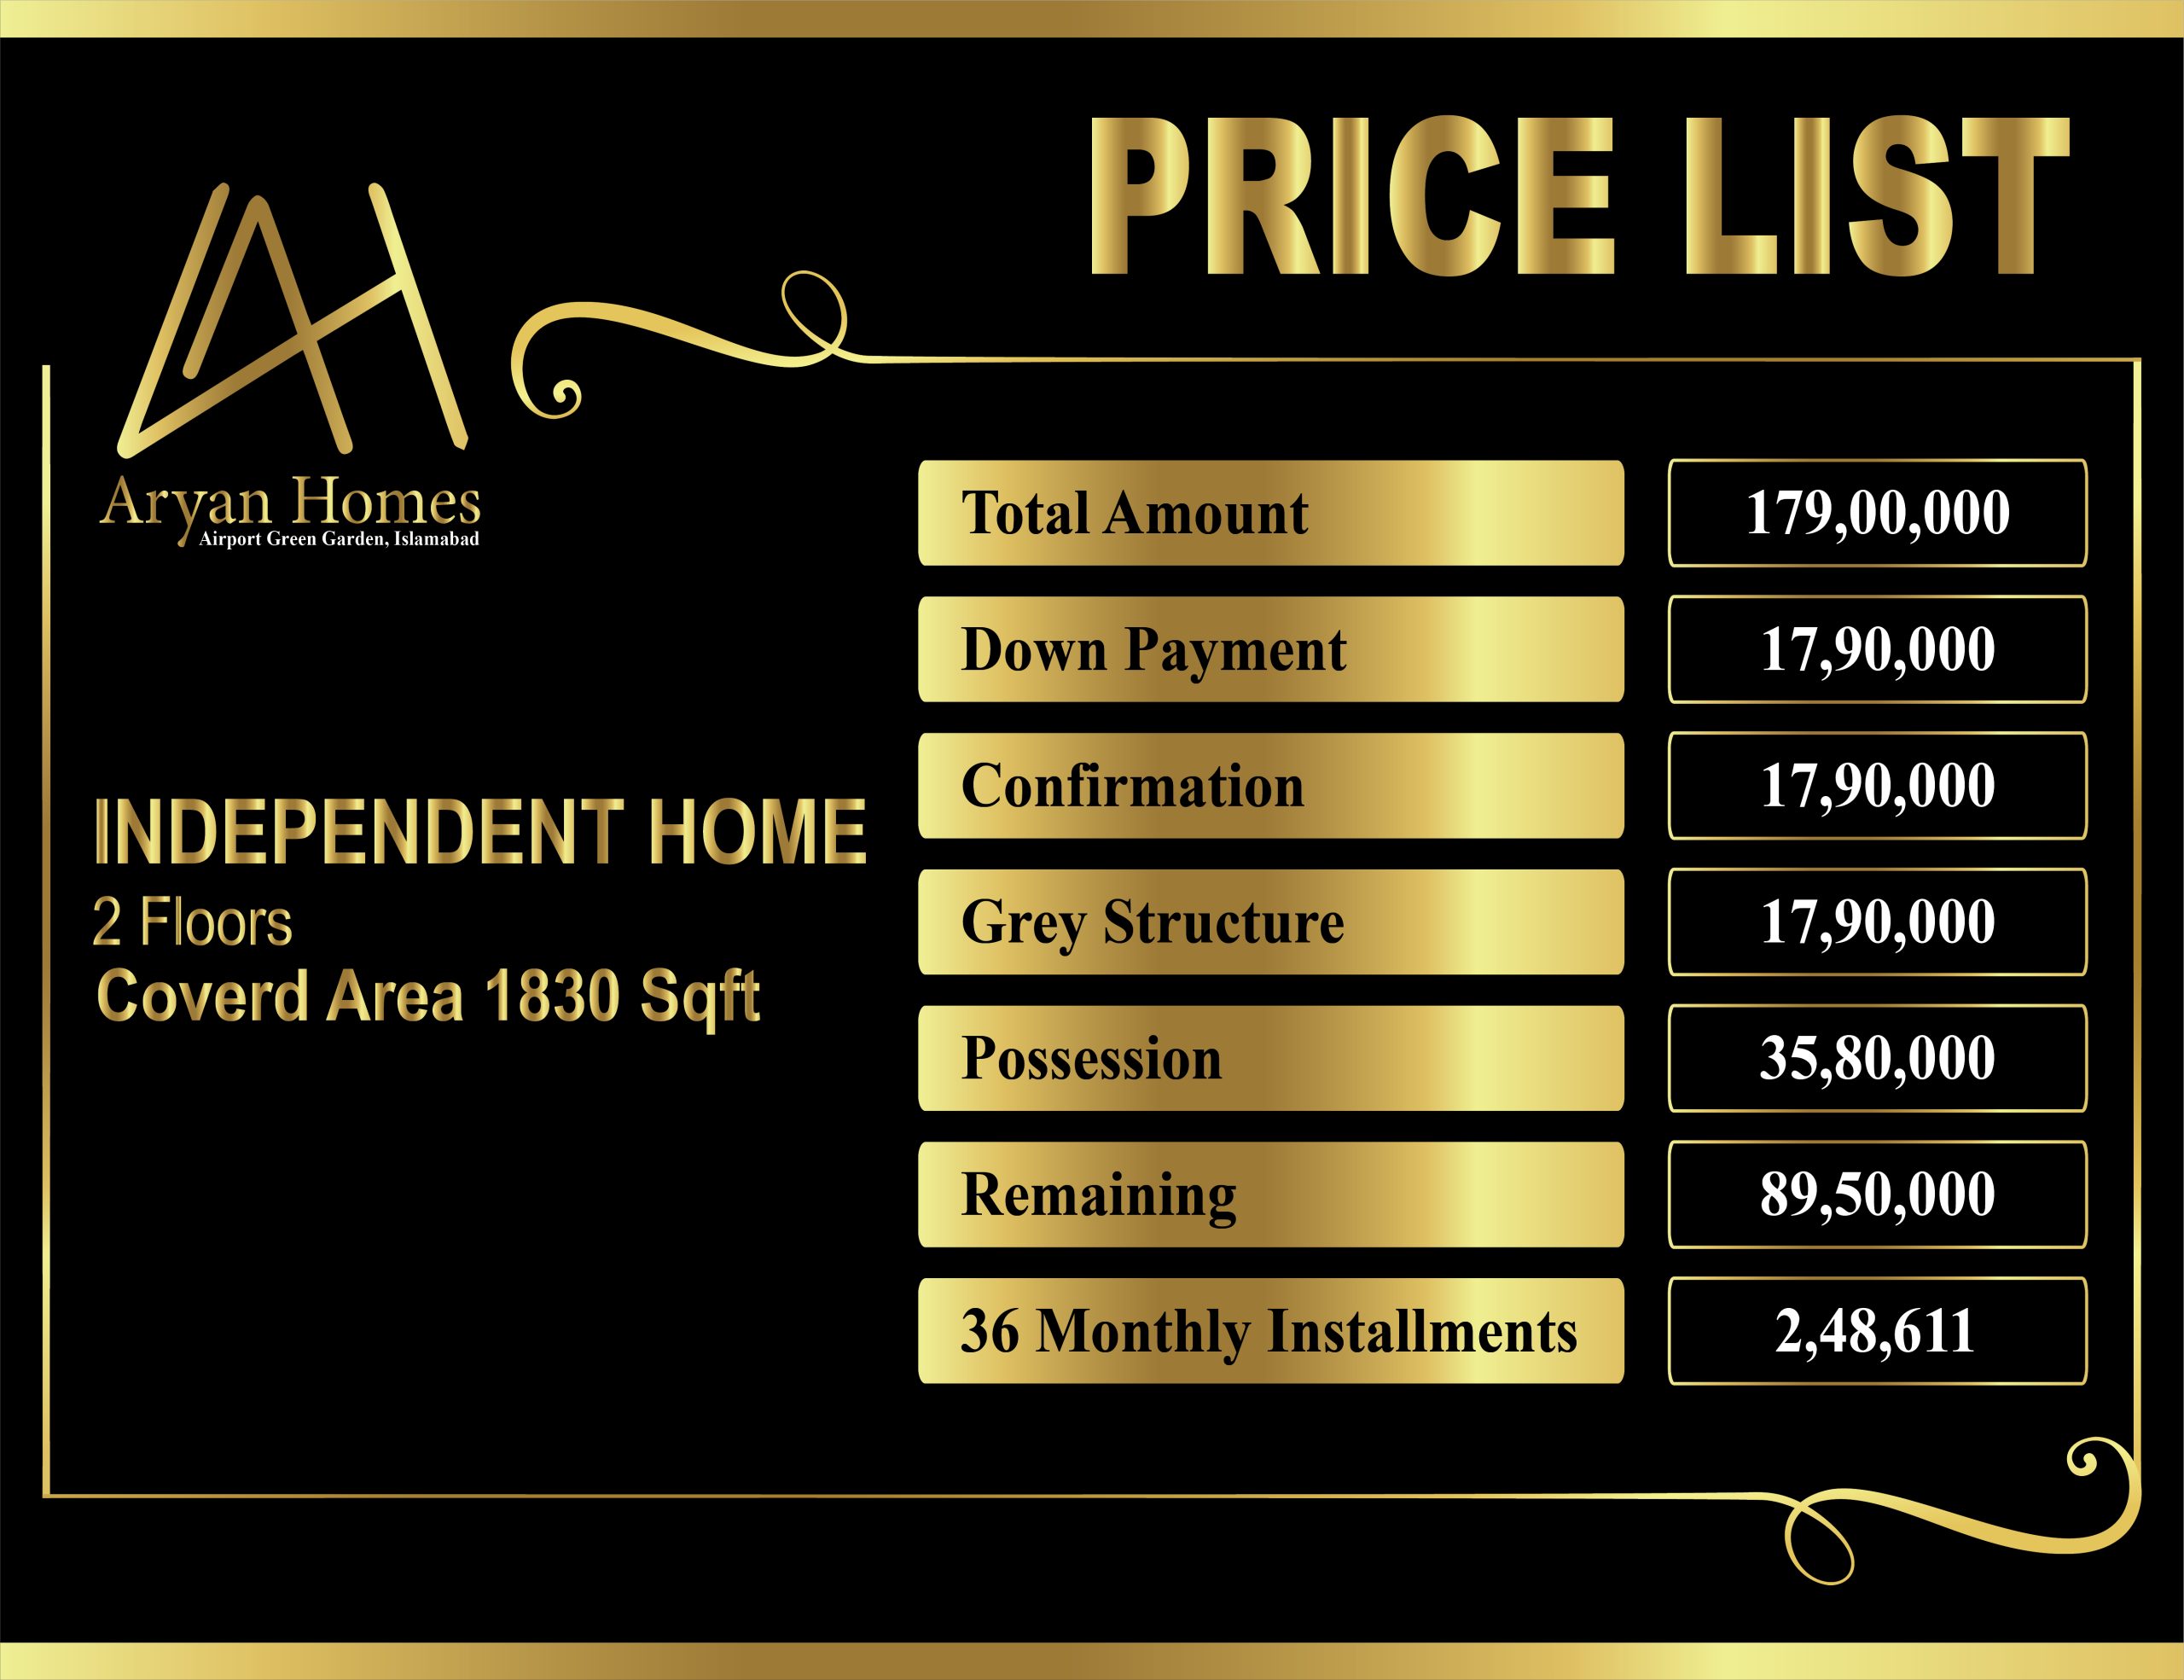 buy home islamabad, aryan homes in installmanet, fast marketing consultants, Payment Plan Aryan Homes